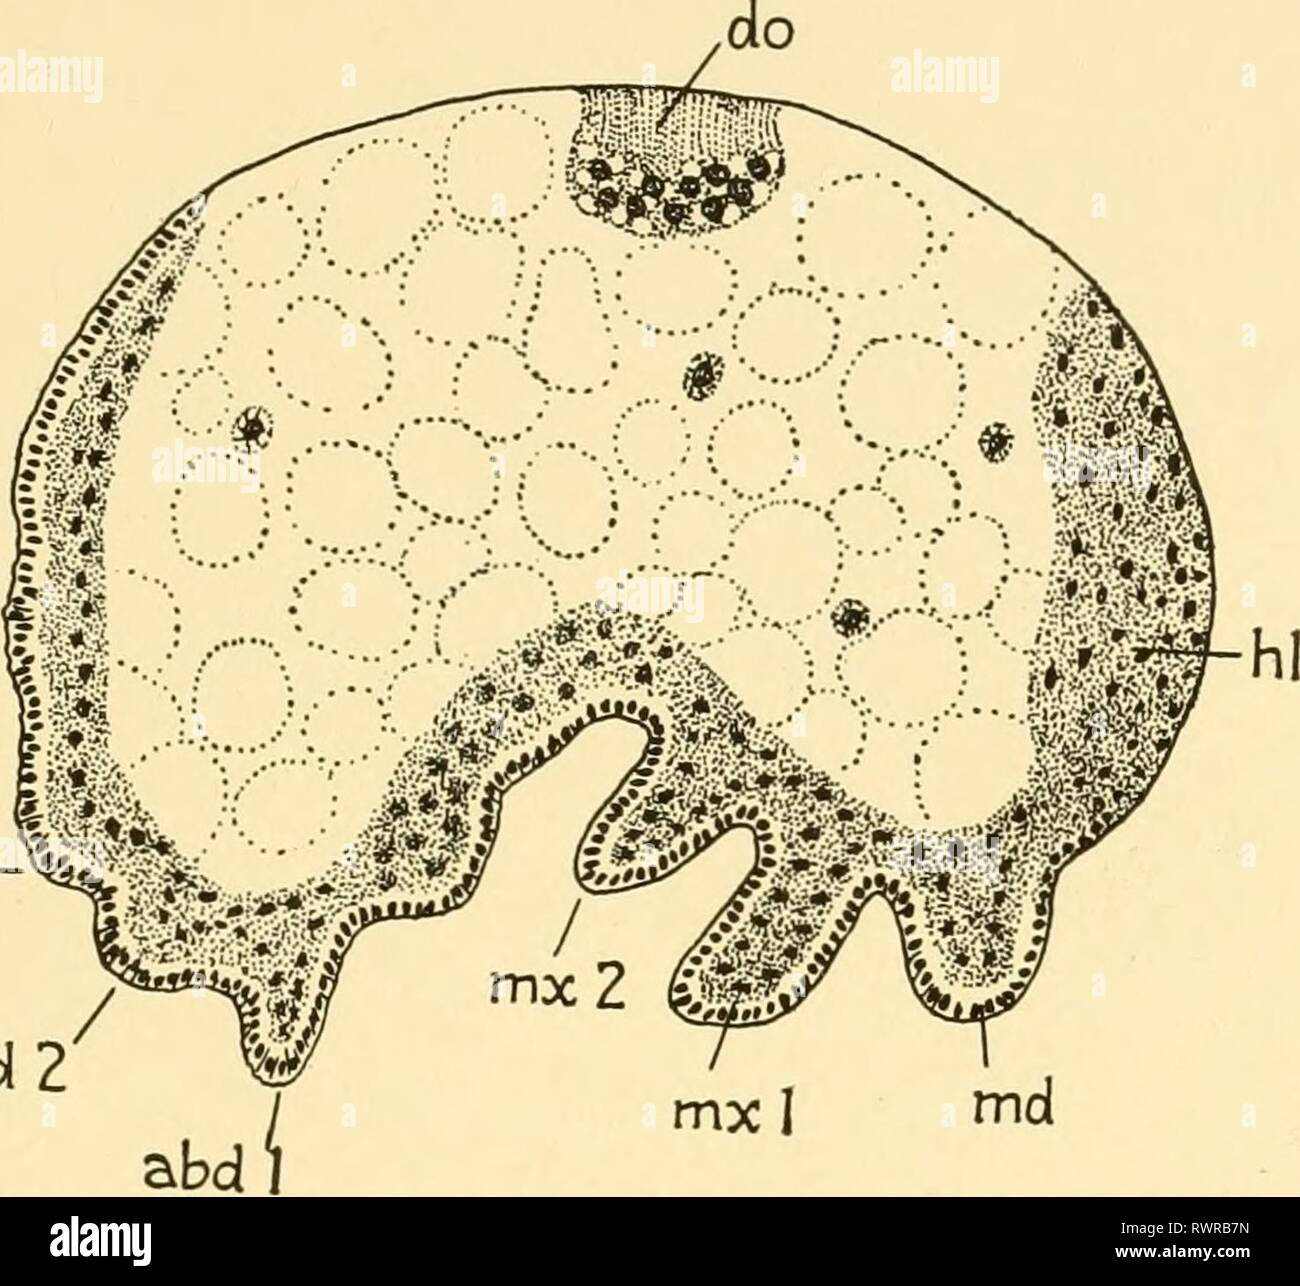 Embryology of insects and myriapods; Embryology of insects and myriapods; the developmental history of insects, centipedes, and millepedes from egg desposition [!] to hatching embryologyofinse00joha Year: 1941  OLIGOENTOMATA AND APTILOTA 173 merited, three divisions posterior to the tubus ventralis usually being visible, while at the posterior end the beginning of the proctodaeum is    Fig. abd4— abd3- mx I ma abd' 79.—Isotoma. Longitudinal section, {abd) Abdominal rudiments, {do) Dorsal organ, {hi) Head lobe, {md) Mandible, (mx) Maxillae. evident. The stomodaeum, which made its appearance a s Stock Photo